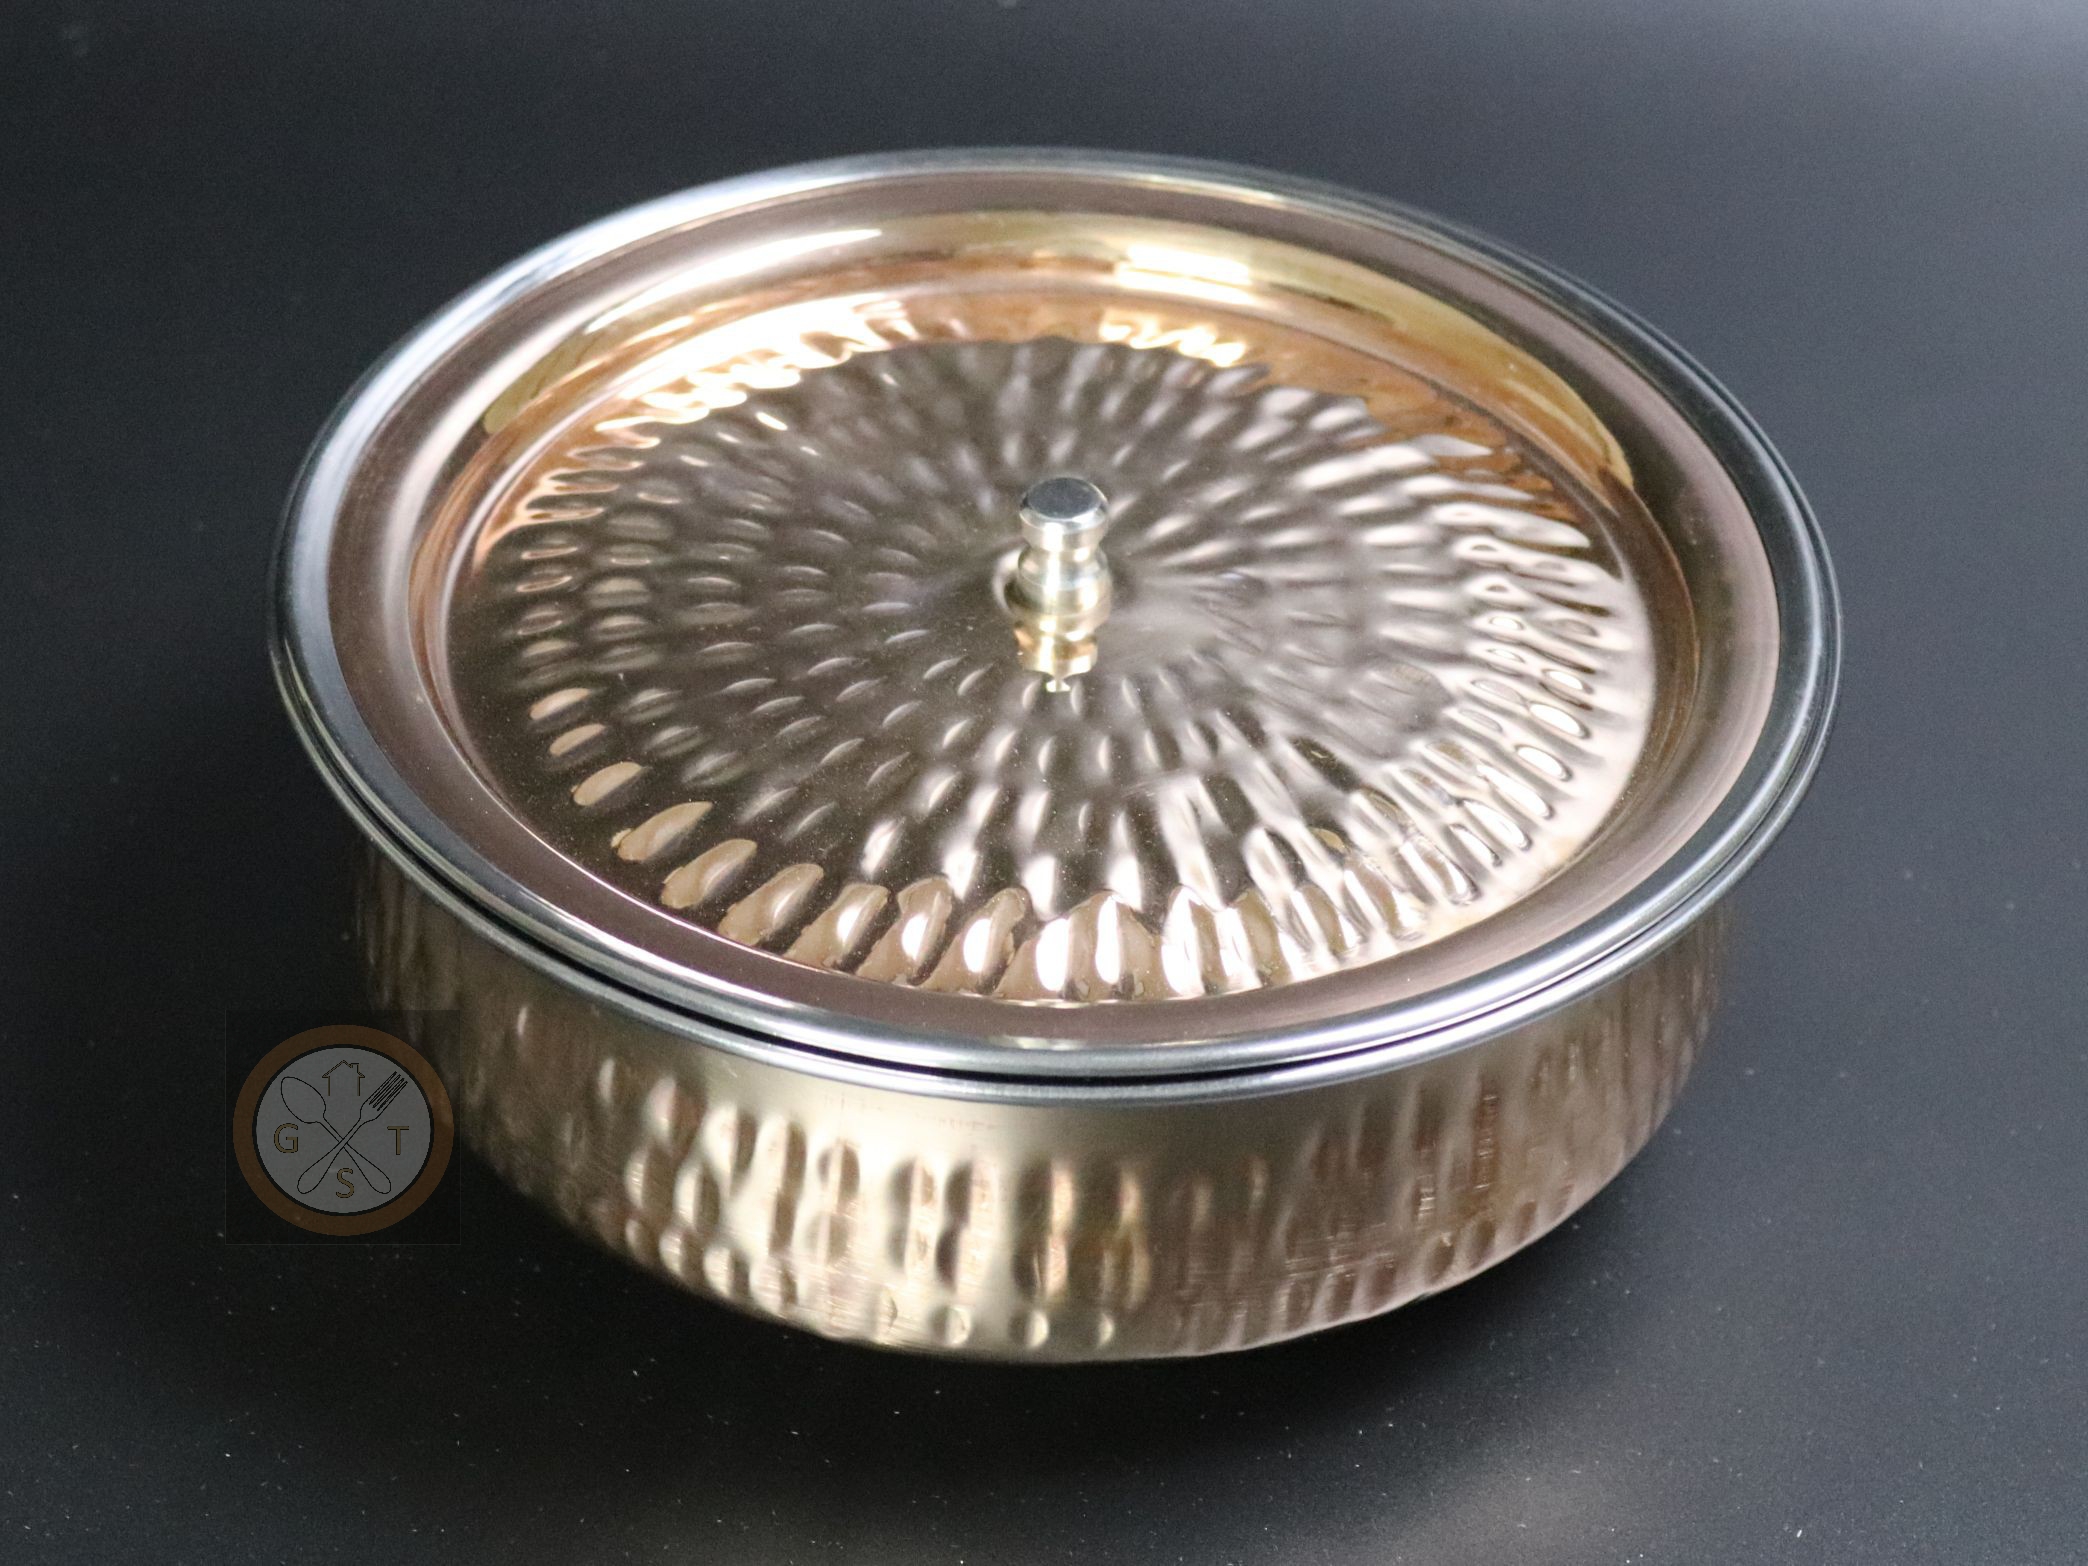 Copper Stainless Steel Serving Dish - 8inch Handi (1.2 Litre Capacity)